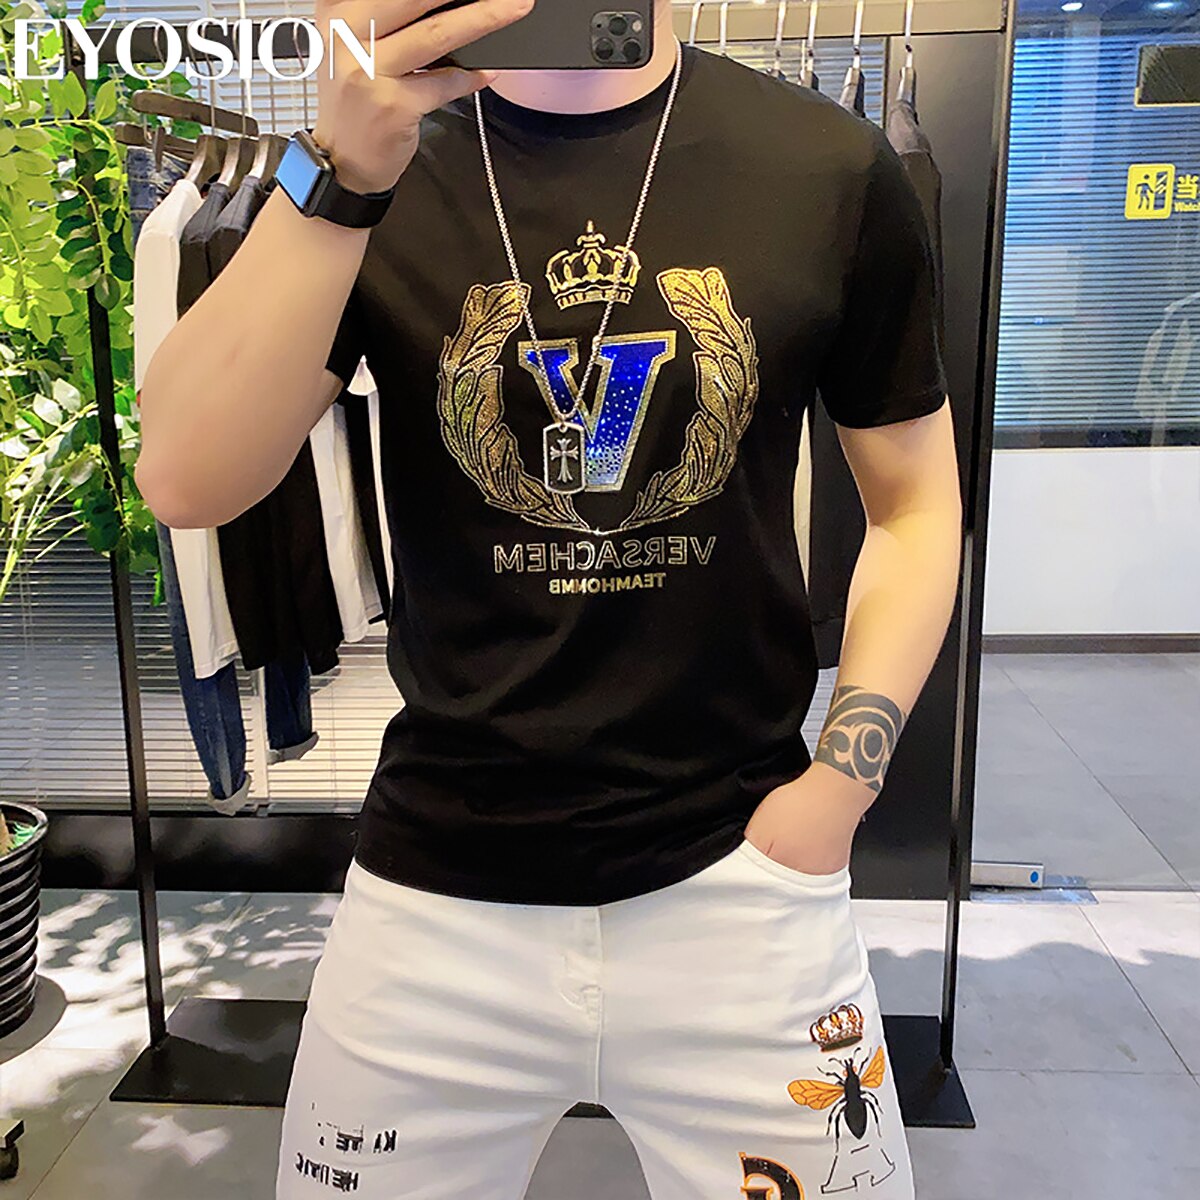 New Cotton T Shirt For Men Sequin V-Letter Summer T-Shirt Fashion Tees Casual Cool Loose 5XL O-neck Male Tops